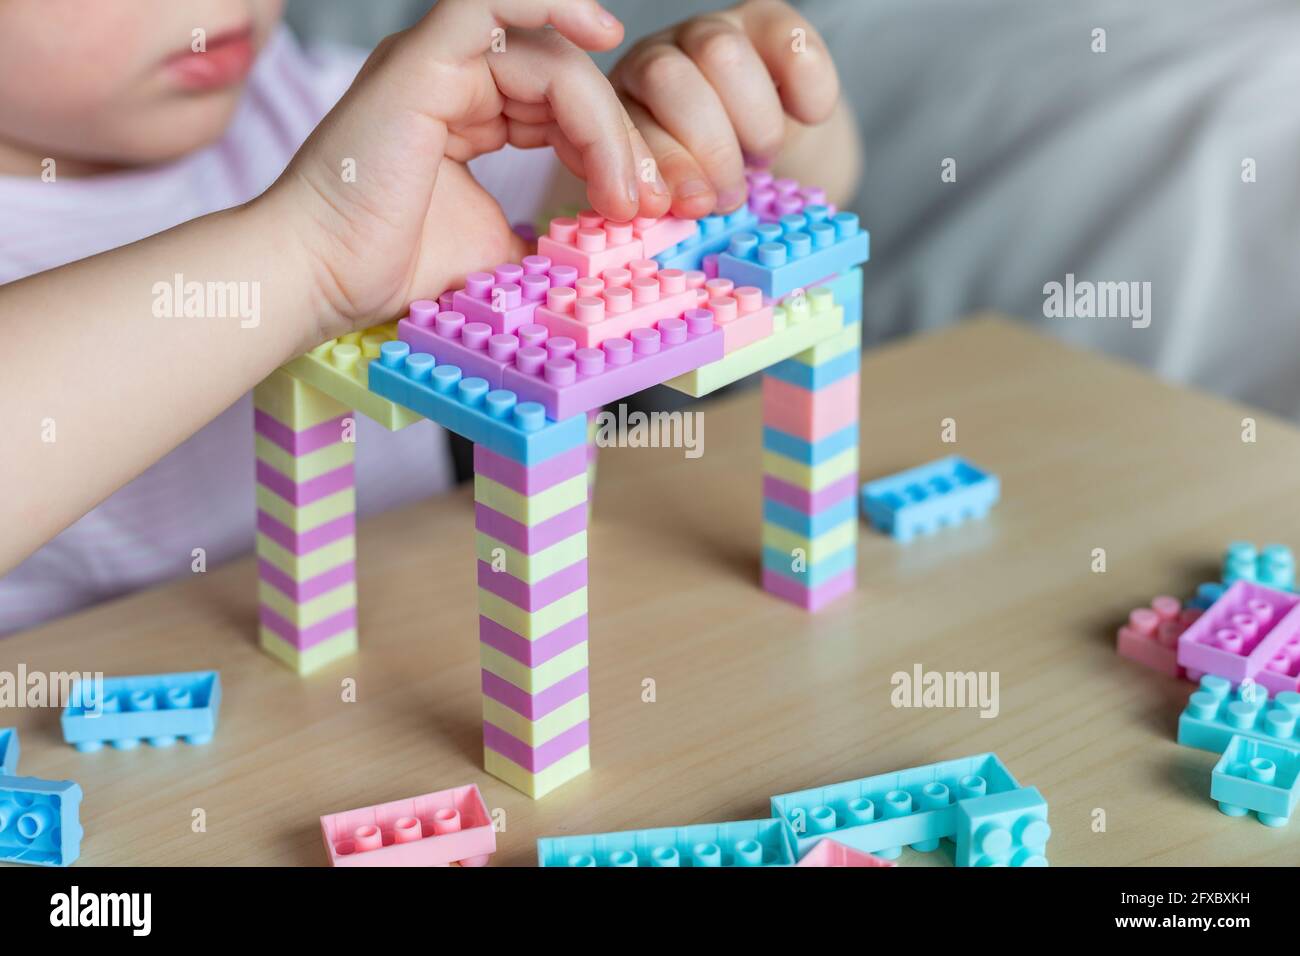 Little beautiful child playing with toy plastic building blocks, sitting at the table. Small girl busy with fun creative leisure activity. Development Stock Photo